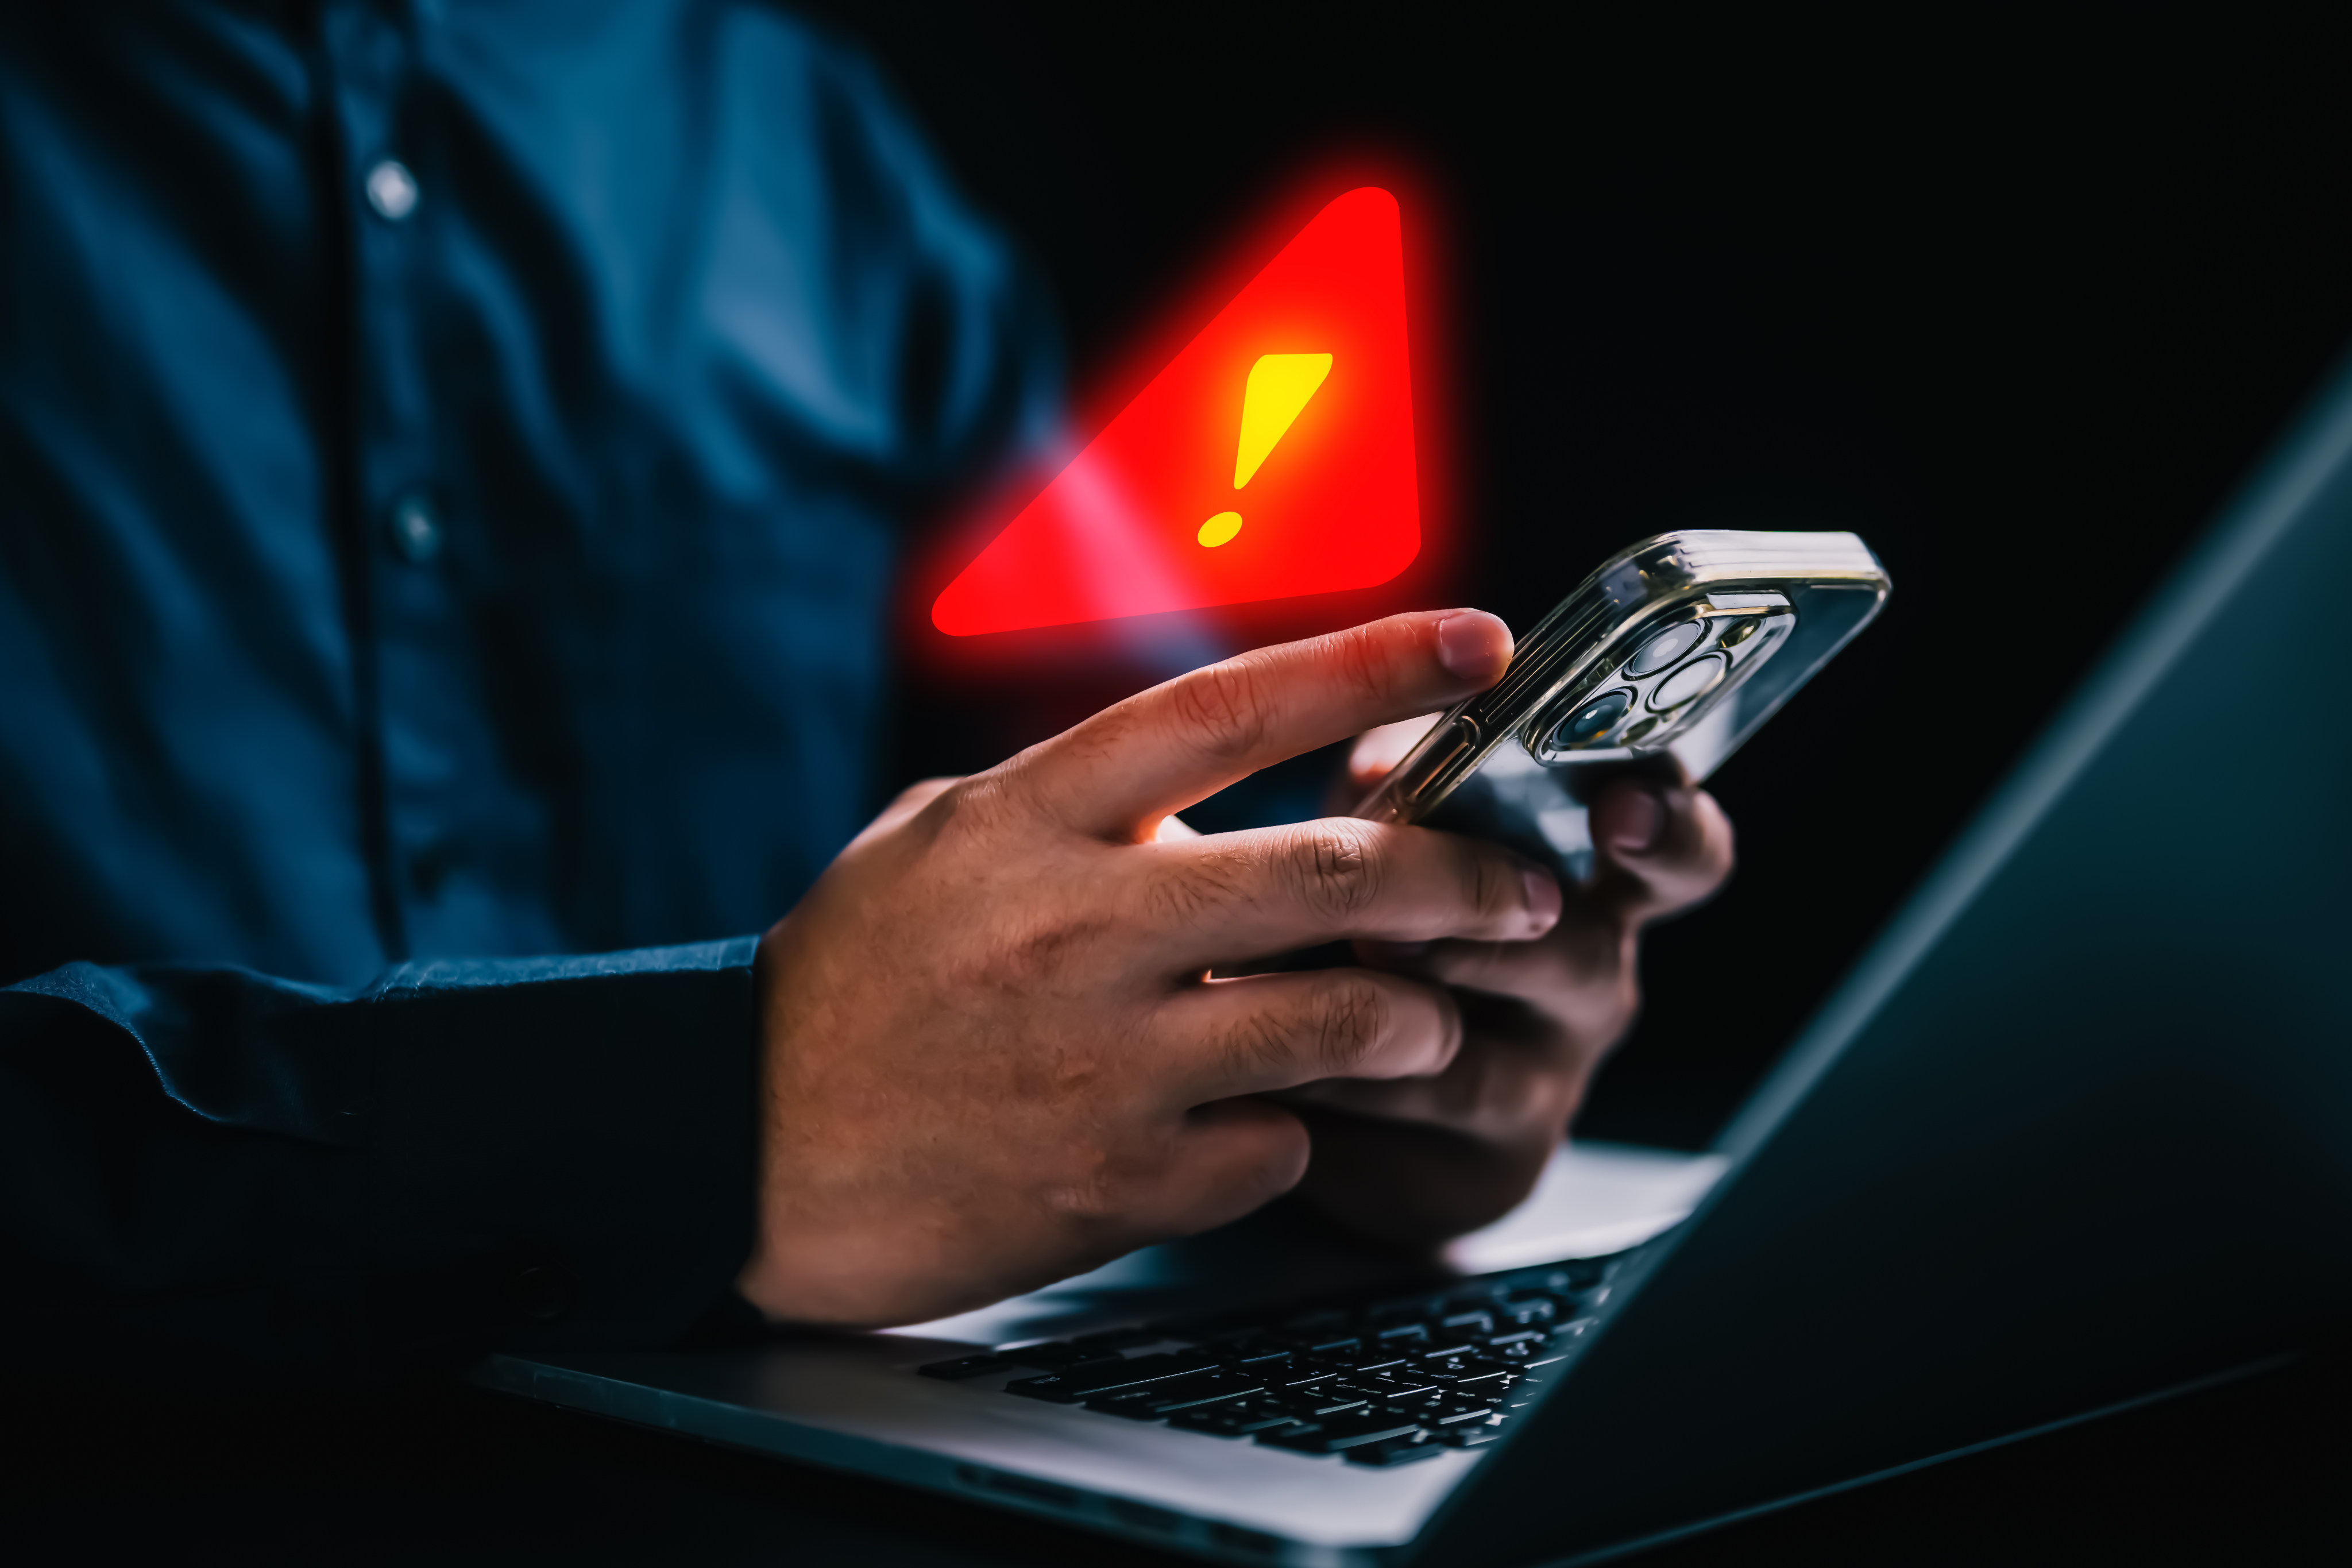 The Faster Payment System is to issue “high risk” warnings from Sunday if users attempt to send cash to accounts flagged “high risk” on the police Scameter. Photo: Getty Images